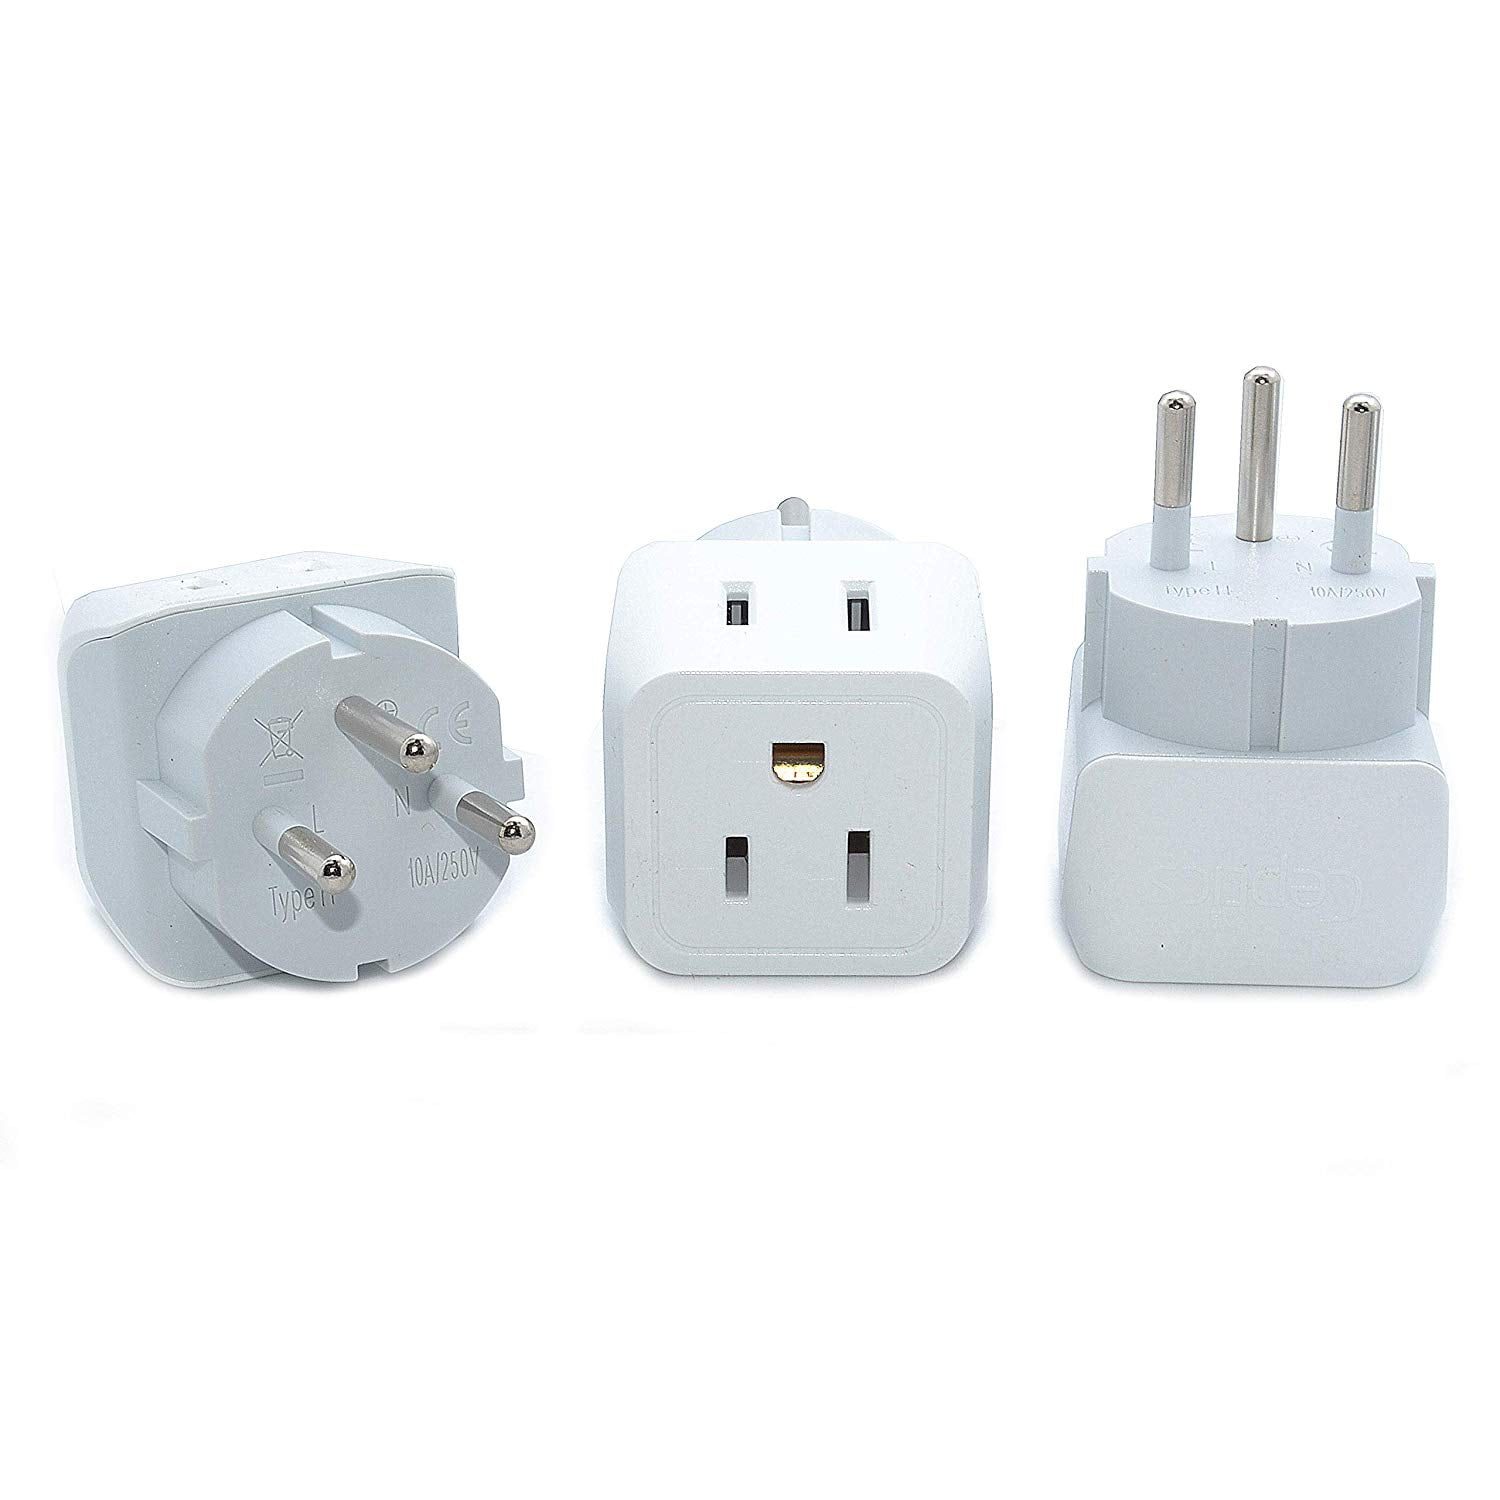 - Ultra Compact- Safe Grounded Perfect for Cell Phones Palestine Travel Adapter Plug with Dual USA Input Laptops Camera Chargers and More 3 Pack CT-14 Type H Ceptics Israel